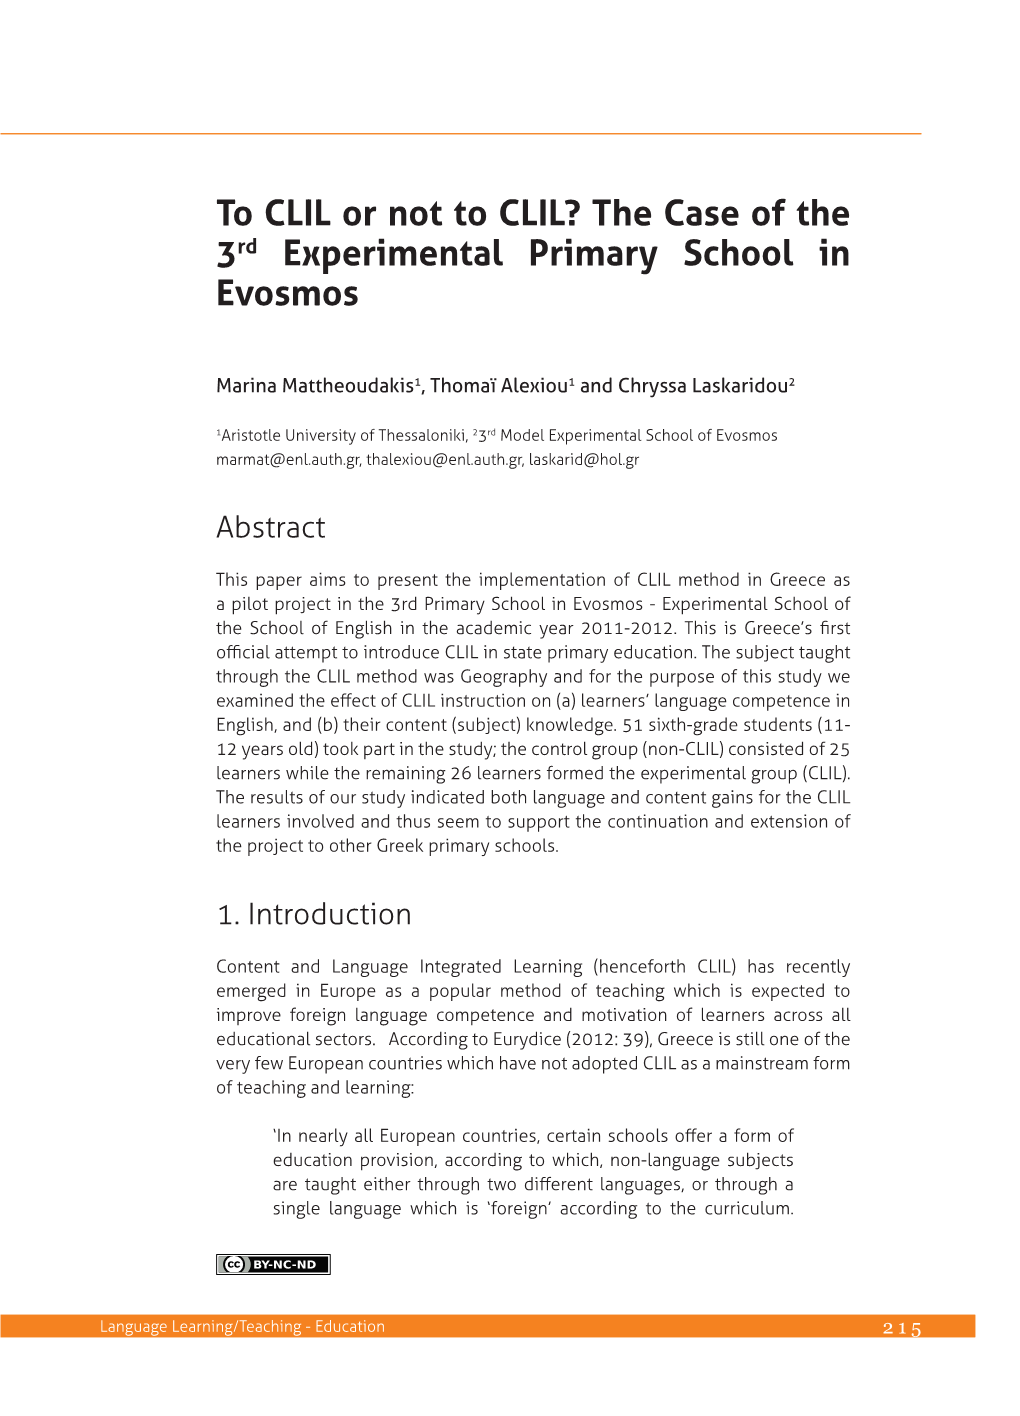 To CLIL Or Not to CLIL? the Case of the 3Rd Experimental Primary School in Evosmos